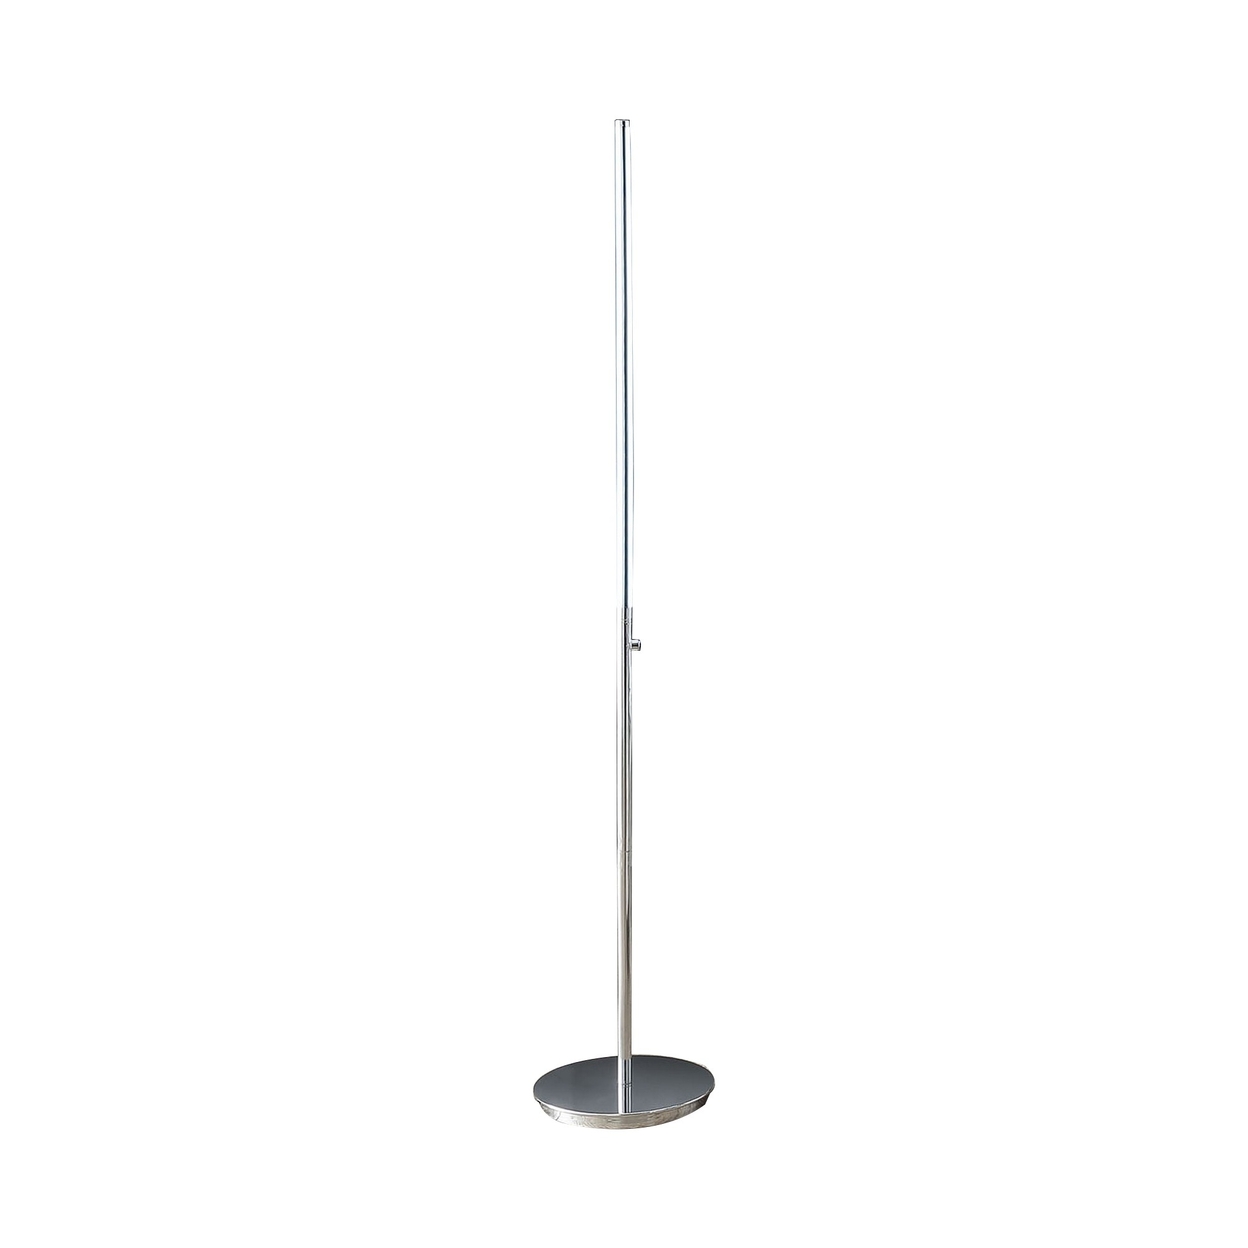 Fizo 60 Inch Floor Lamp, LED Light, Metal Base With Touch Switch, Chrome -Saltoro Sherpi